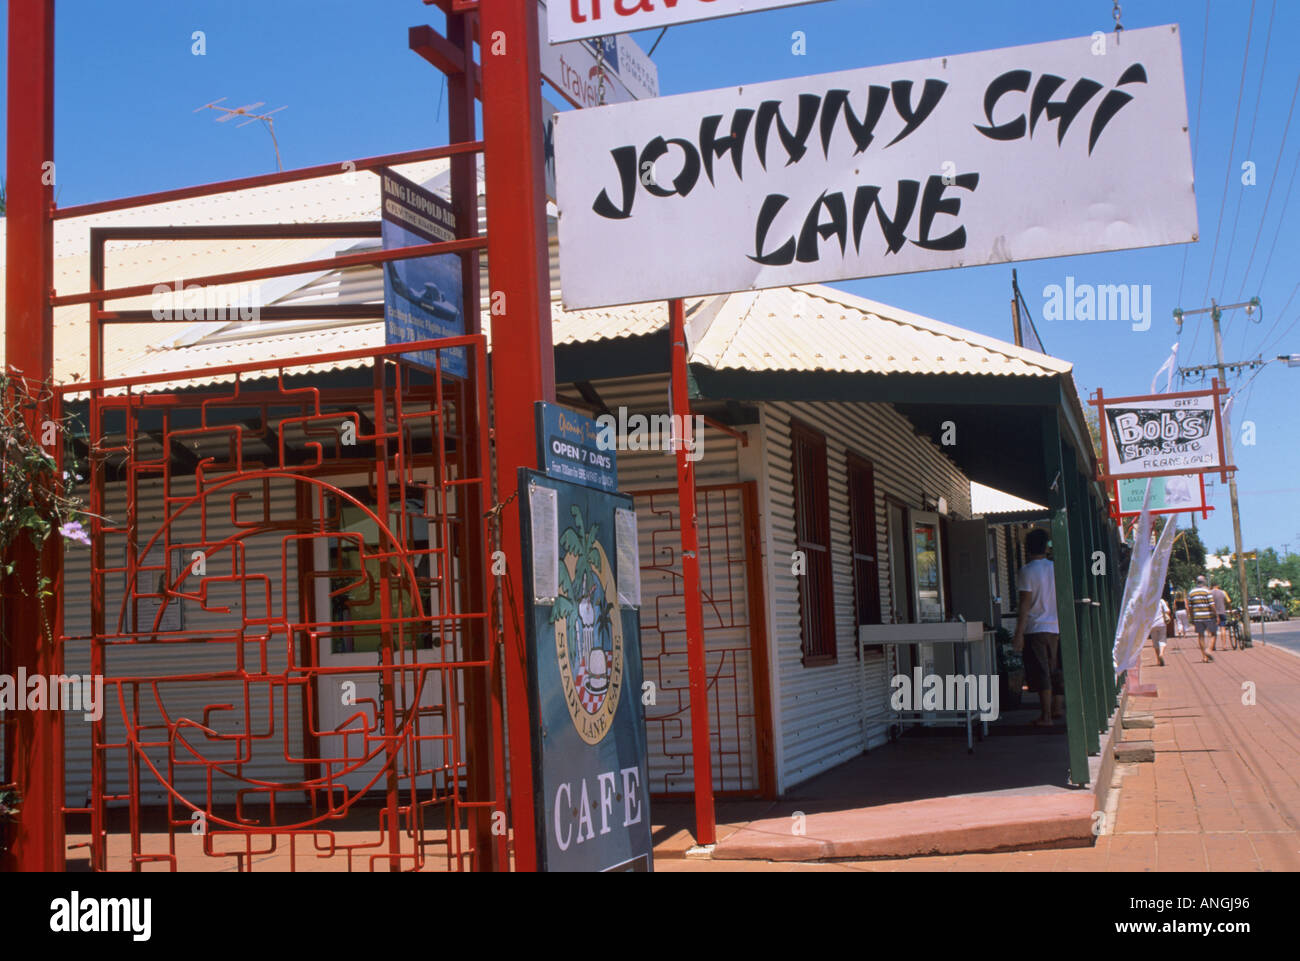 Johnny Chi Lane', shopping area, China Town, Broome town centre, Western  Australia Stock Photo - Alamy